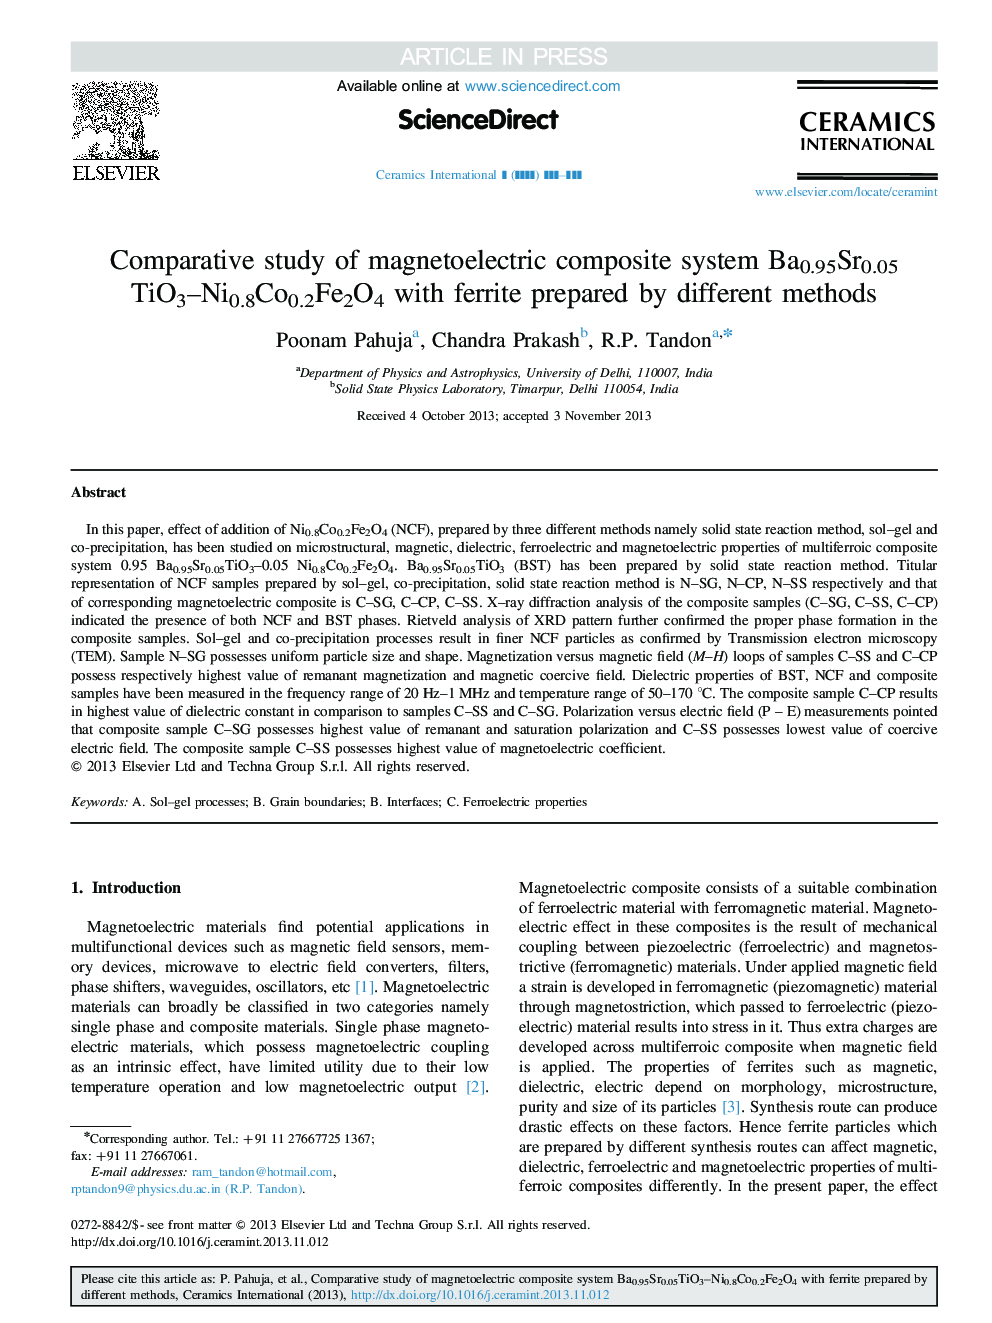 Comparative study of magnetoelectric composite system Ba0.95Sr0.05TiO3-Ni0.8Co0.2Fe2O4 with ferrite prepared by different methods